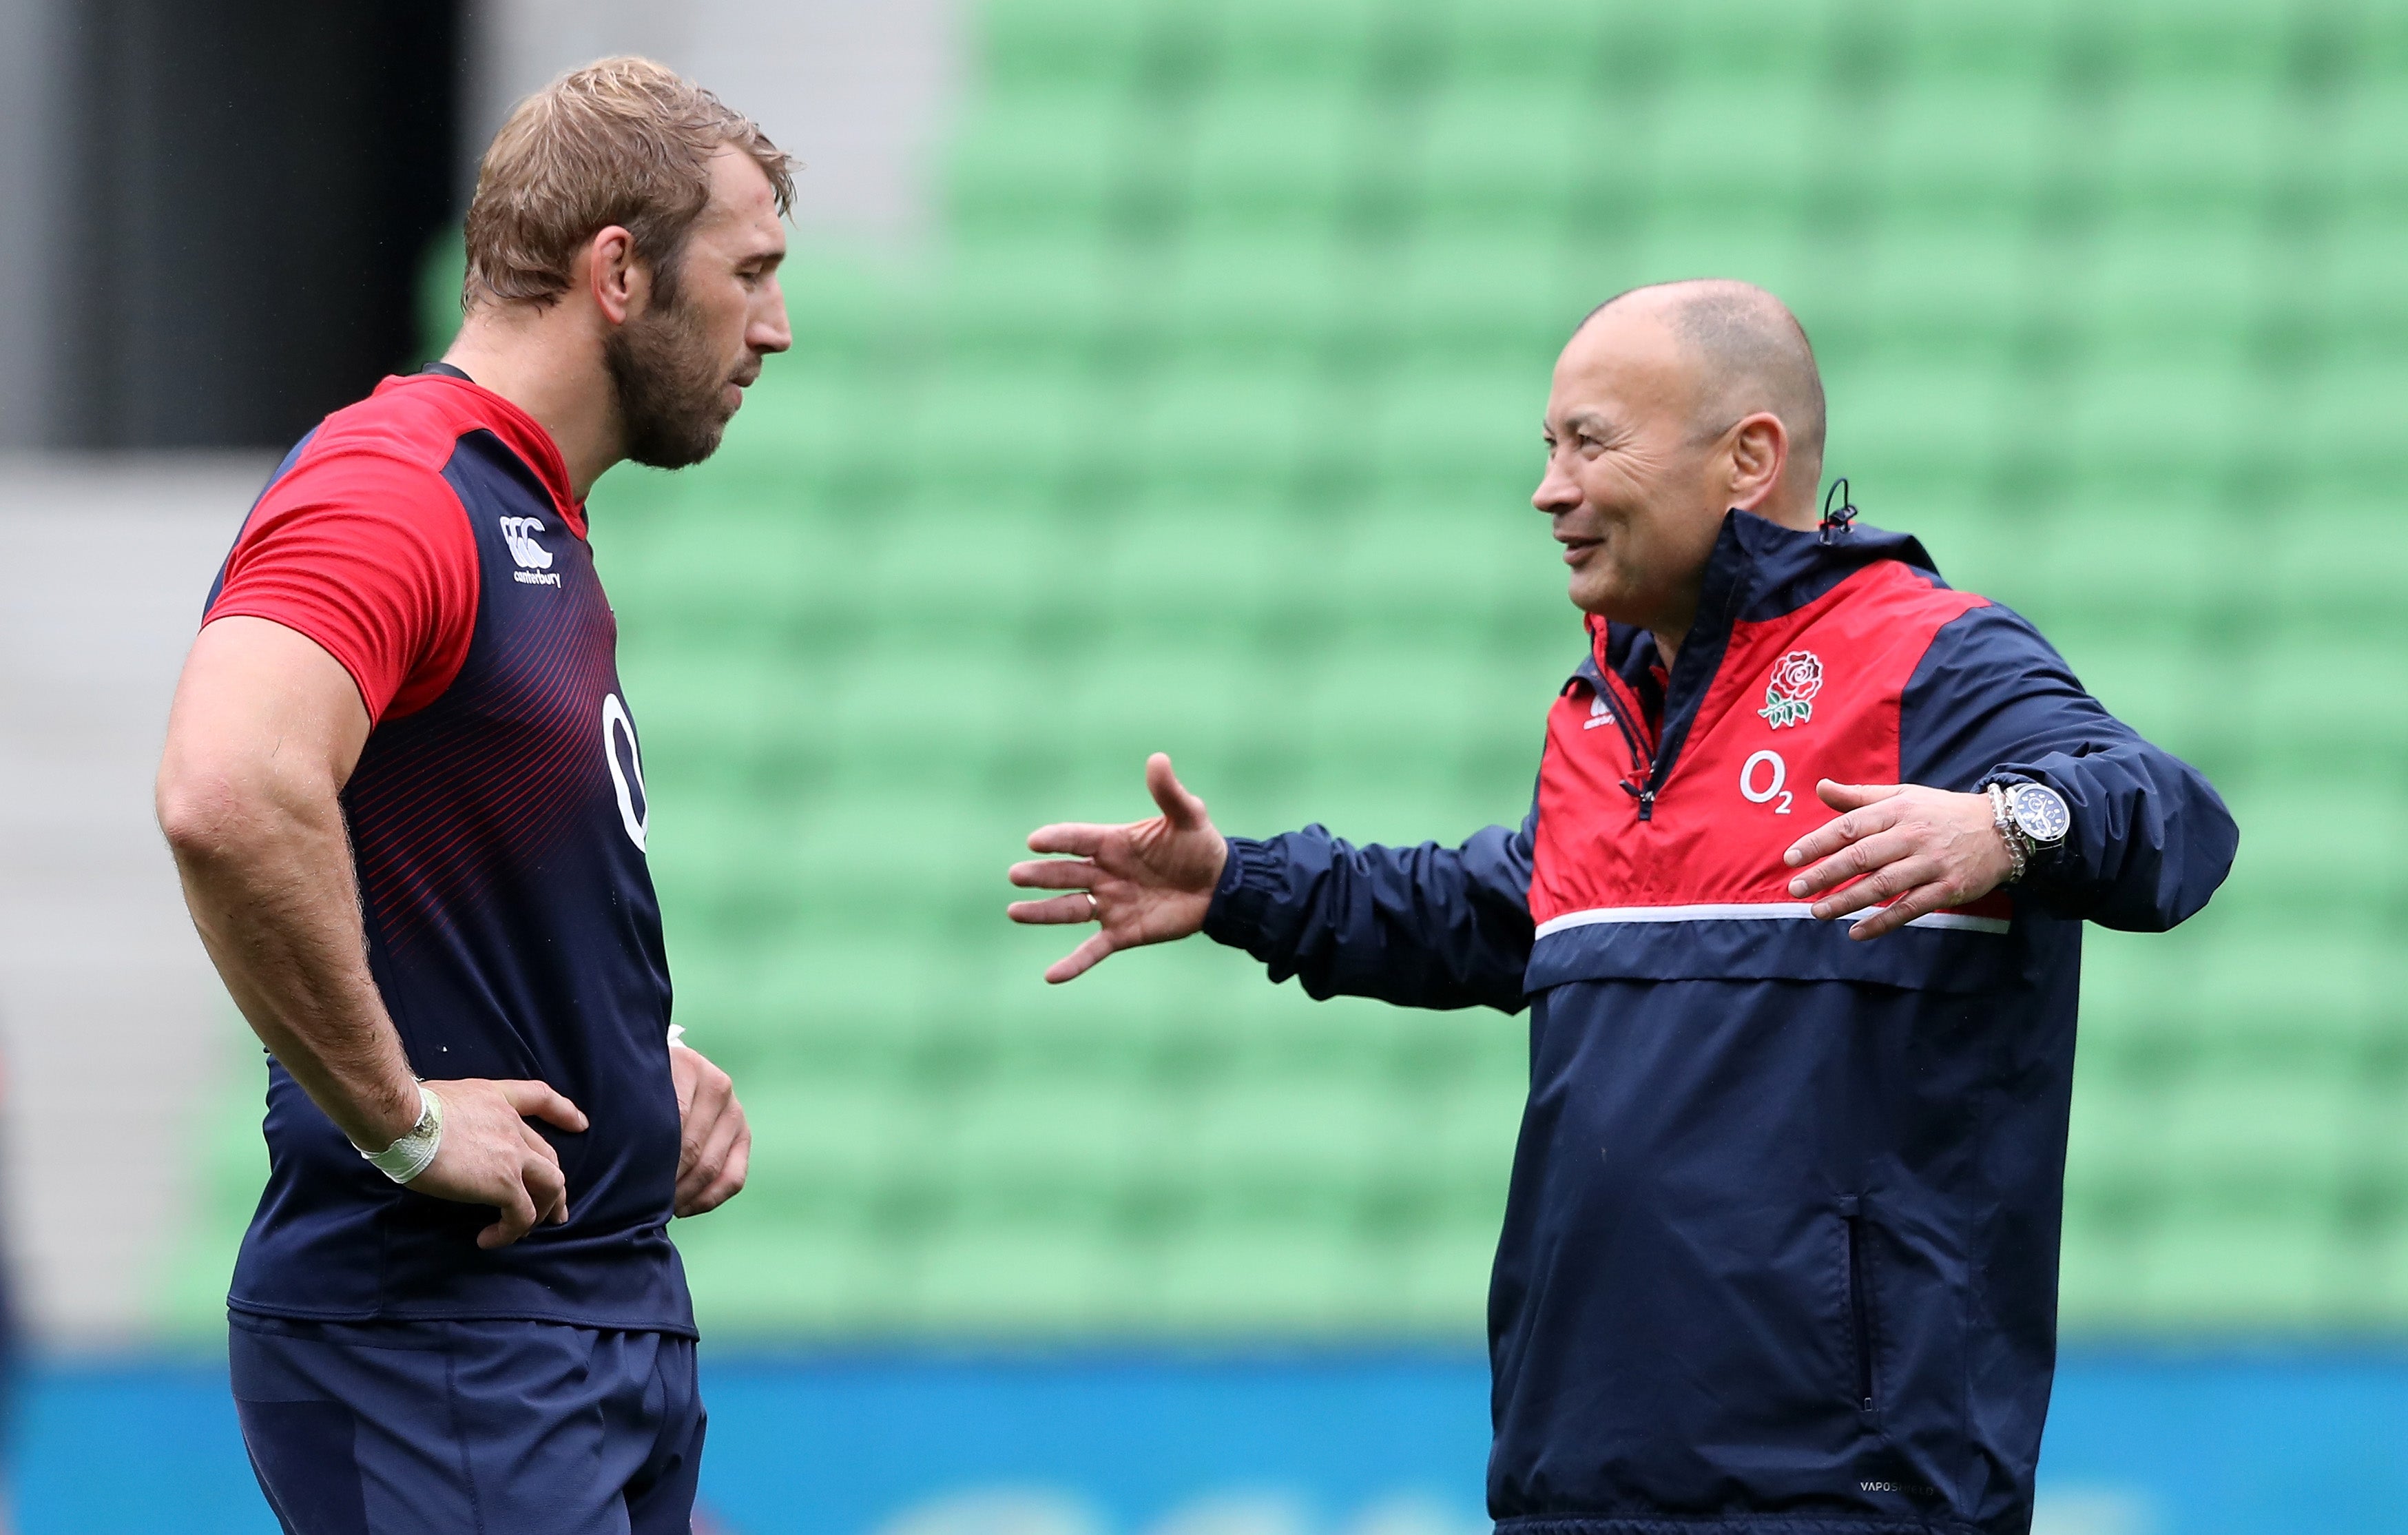 Chris Robshaw will make his final international appearance against England this Sunday